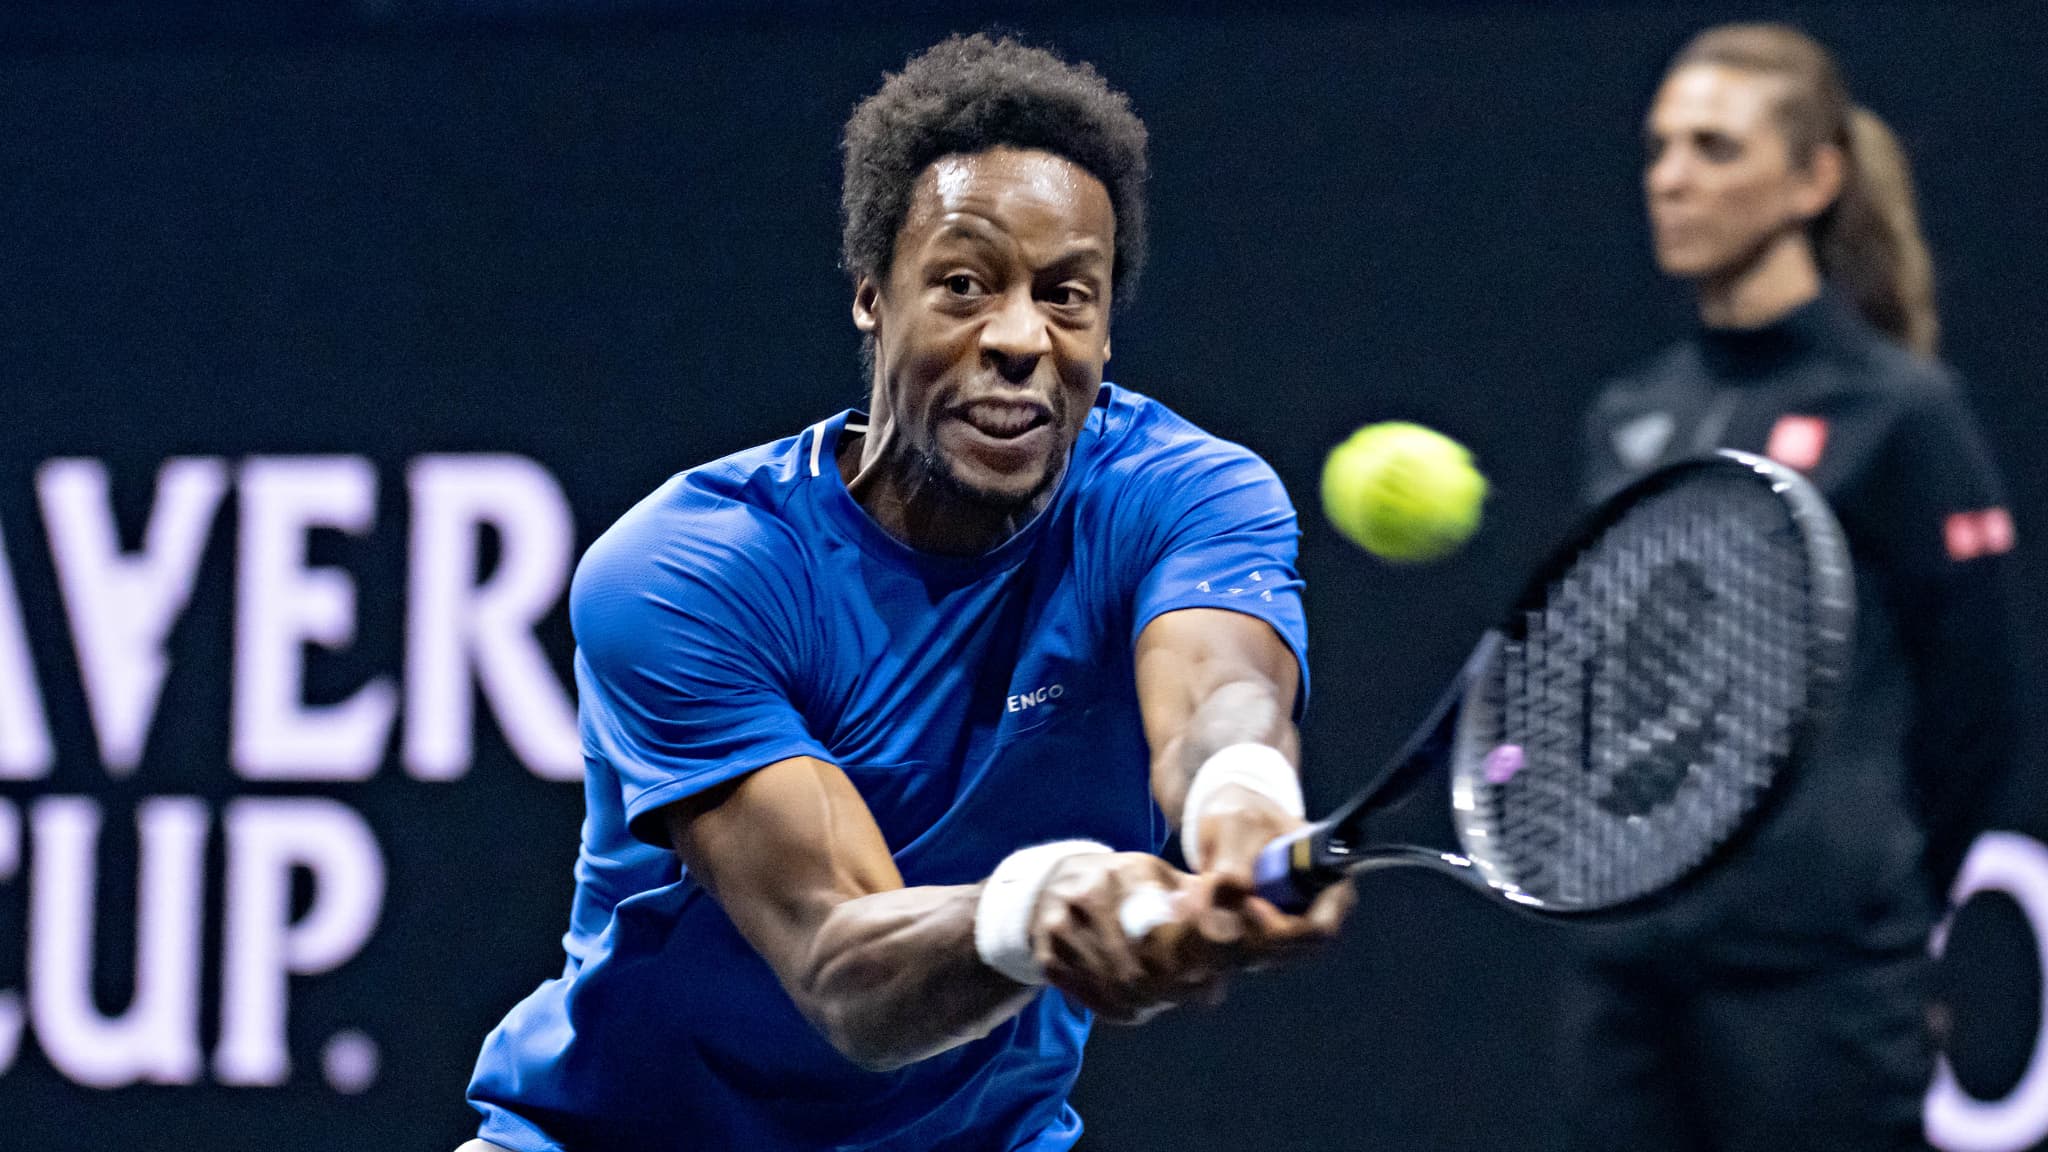 Gaël Monfils Reflects on Clash with Félix Auger-Aliassime at the Laver Cup as His Career Nears Its End